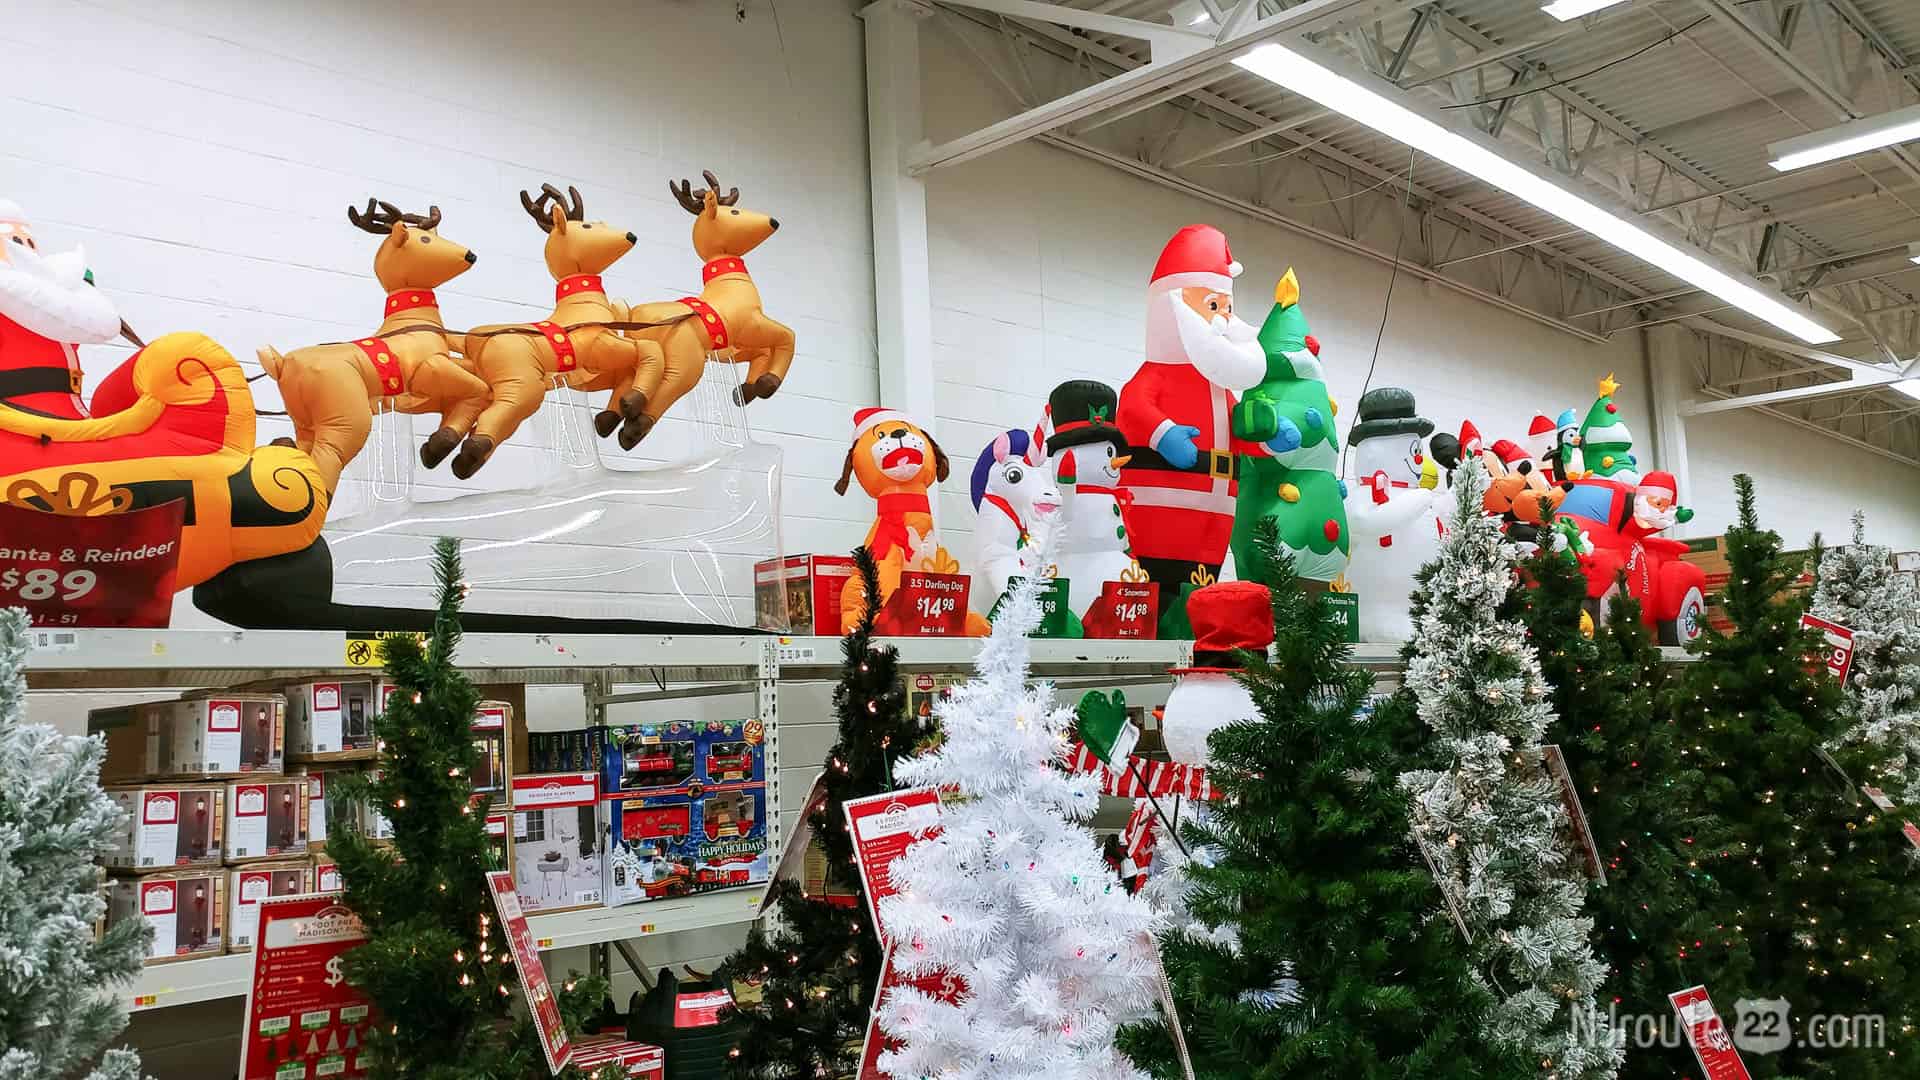 How much does Christmas overload matter to you? - NJ Route 22